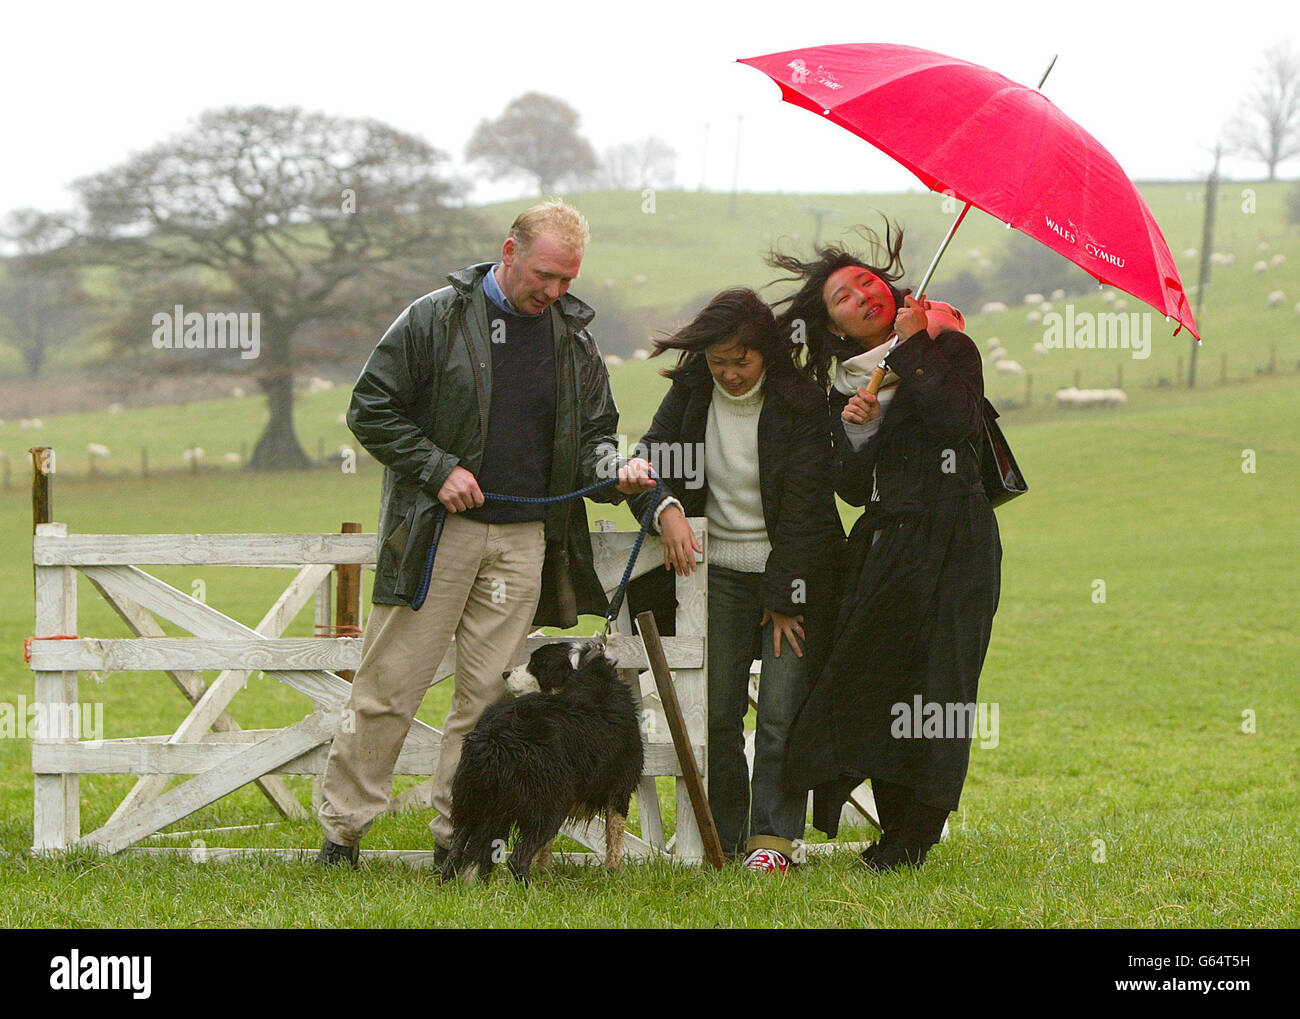 Japanese travel writers Alexandre Yumi (left) and Harang Miwa with Aled Owen and his dog Bob, where they watched a display at the sheepdog centre 'Ewe-Phoria' at Llangwm, Denbighshire, North Wales. * The attraction treats visitors to a show of 14 different breeds of ram, a shearing display and a One Man And His Dog-style sheepdog demonstration. Tourism consultancy firm EuroWales, which arranged the visit, hopes it will capture the imagination of wealthy Japanese travellers. Stock Photo